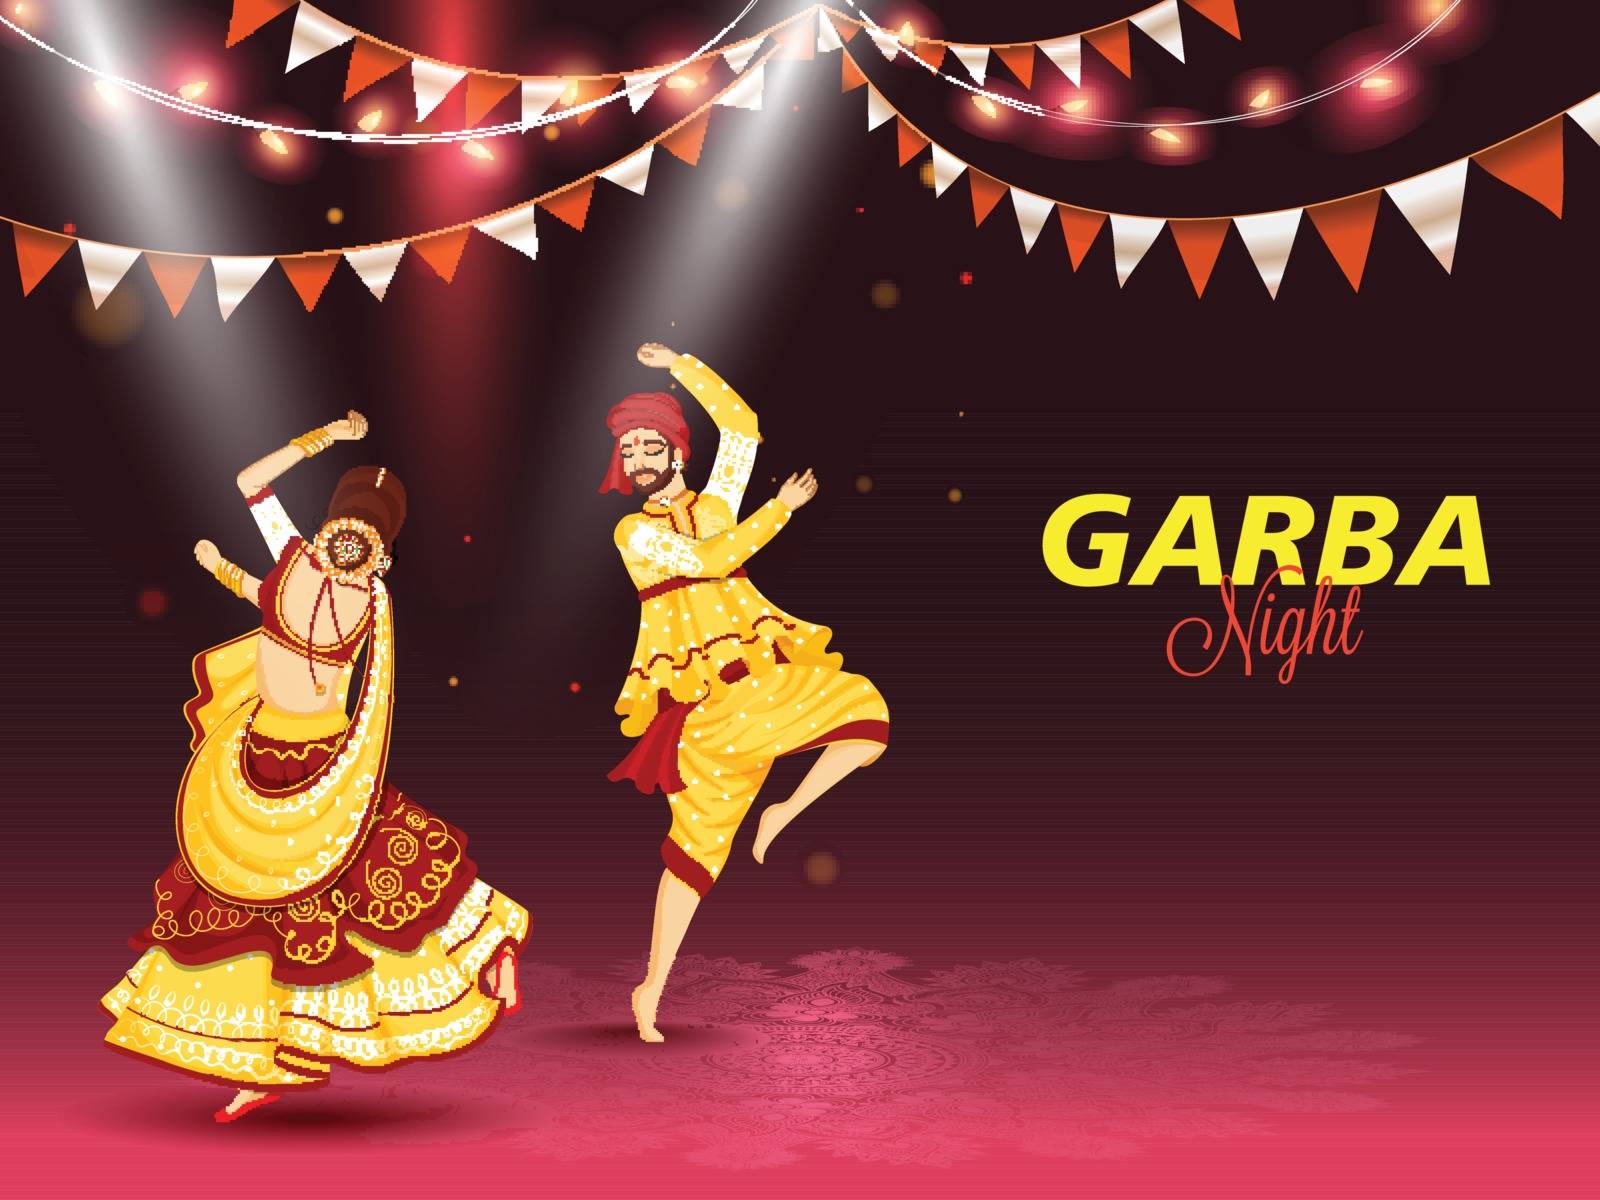 Illustration of couple dancing on occasion of Garba Night concept. Can be used as advertising poster or banner design.